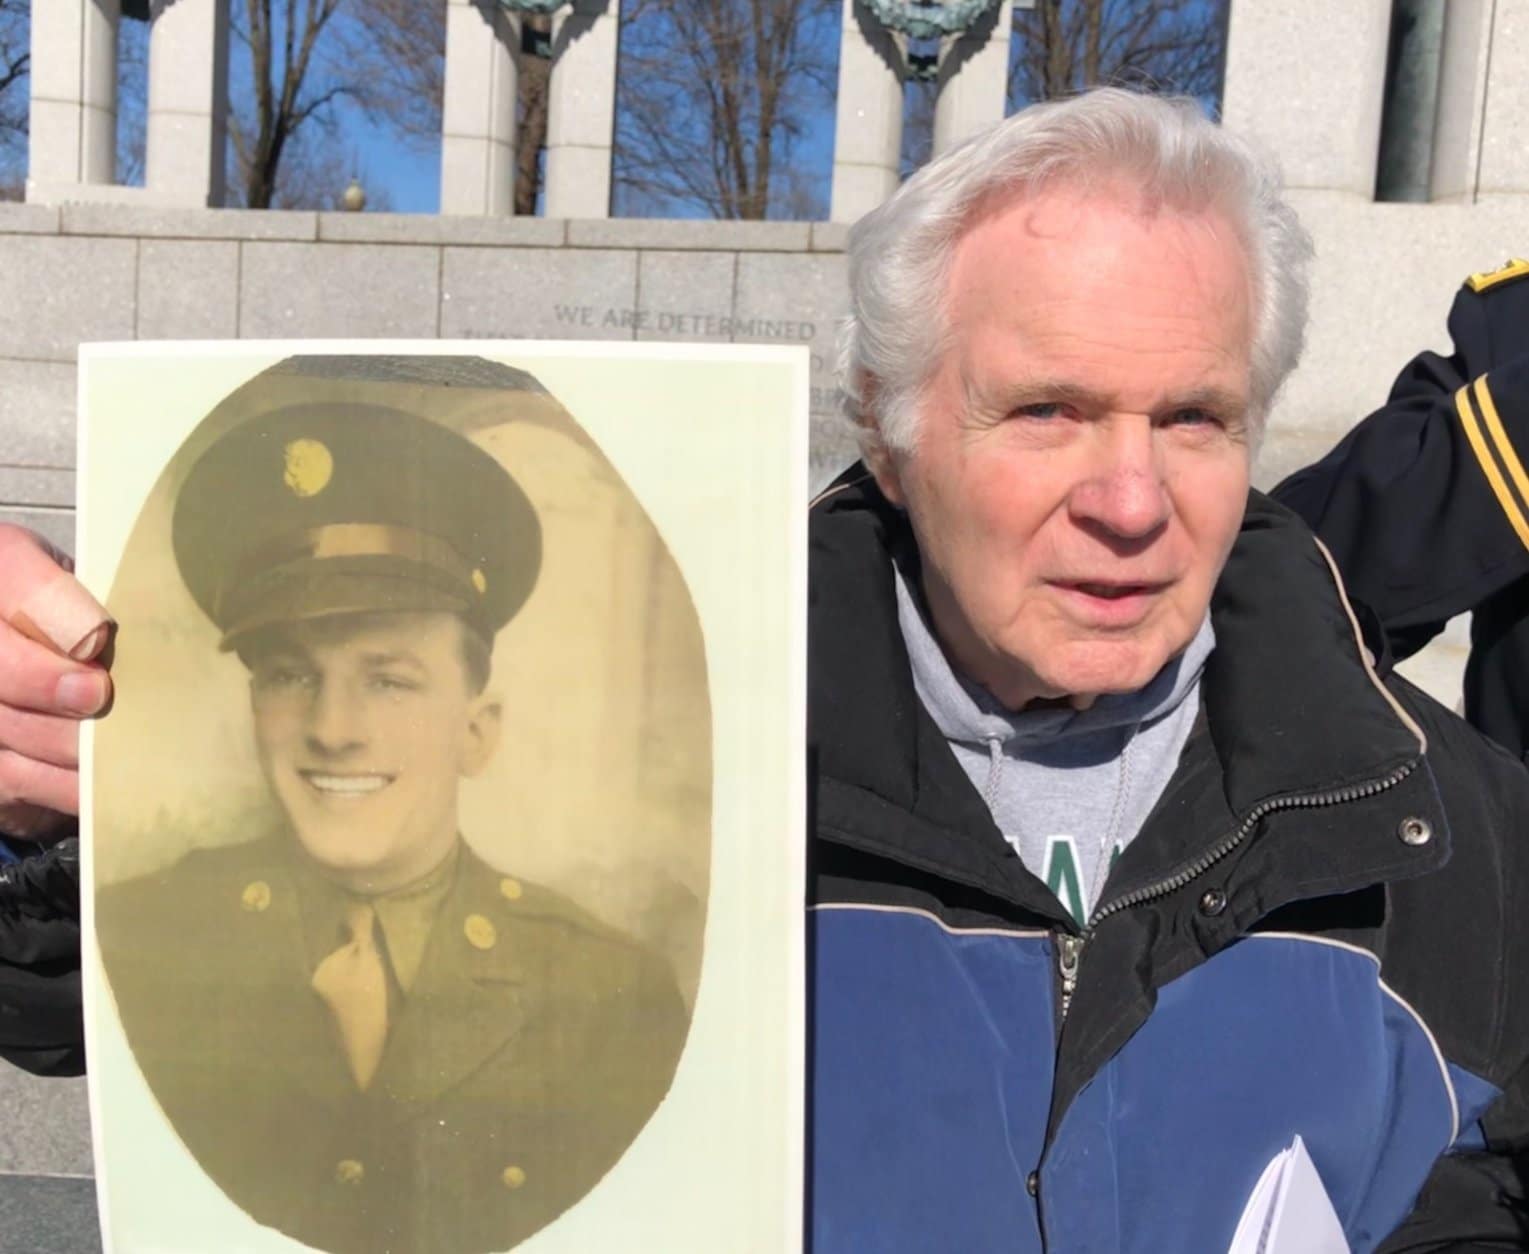 Fred Muntzner is the son of Frederick Muntzner, who was killed at The Battle of Anzio on April 18, 1944. (WTOP/Kristi King)